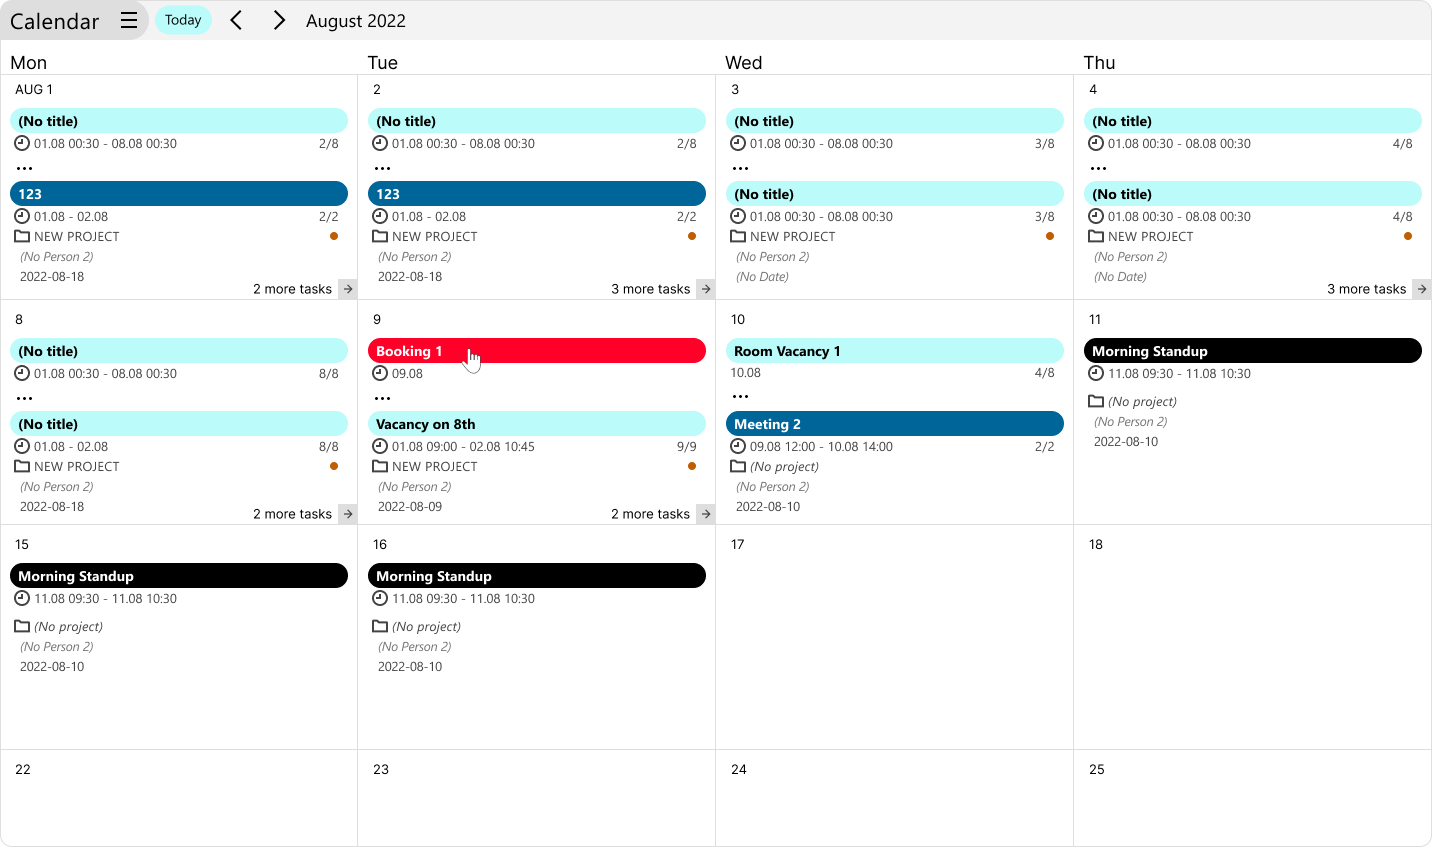 Resource Calendar View takes on the color of the Resource